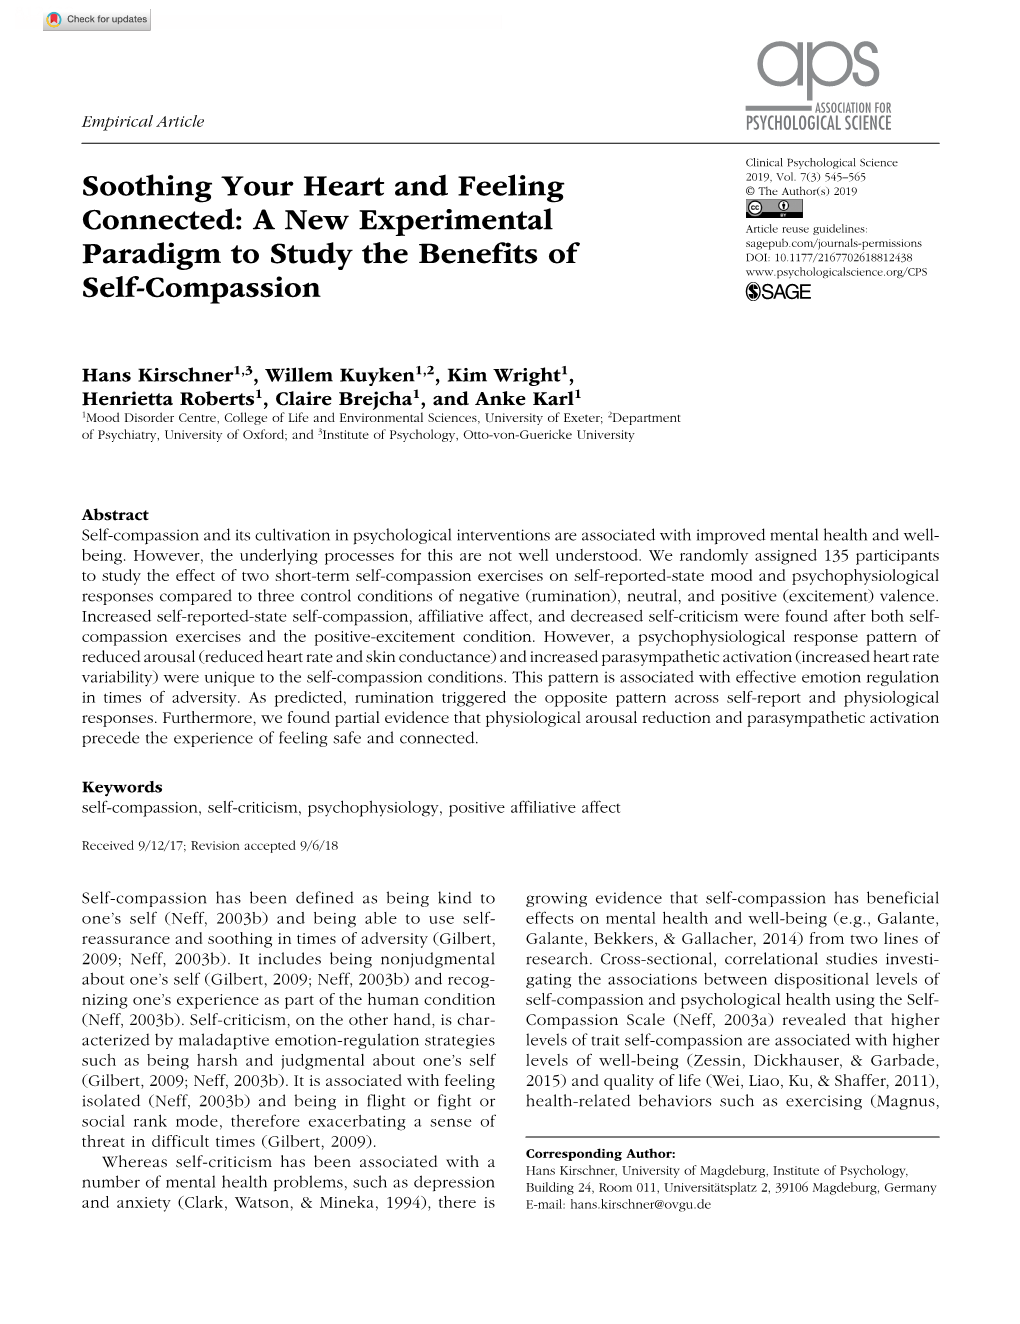 Soothing Your Heart and Feeling Connected